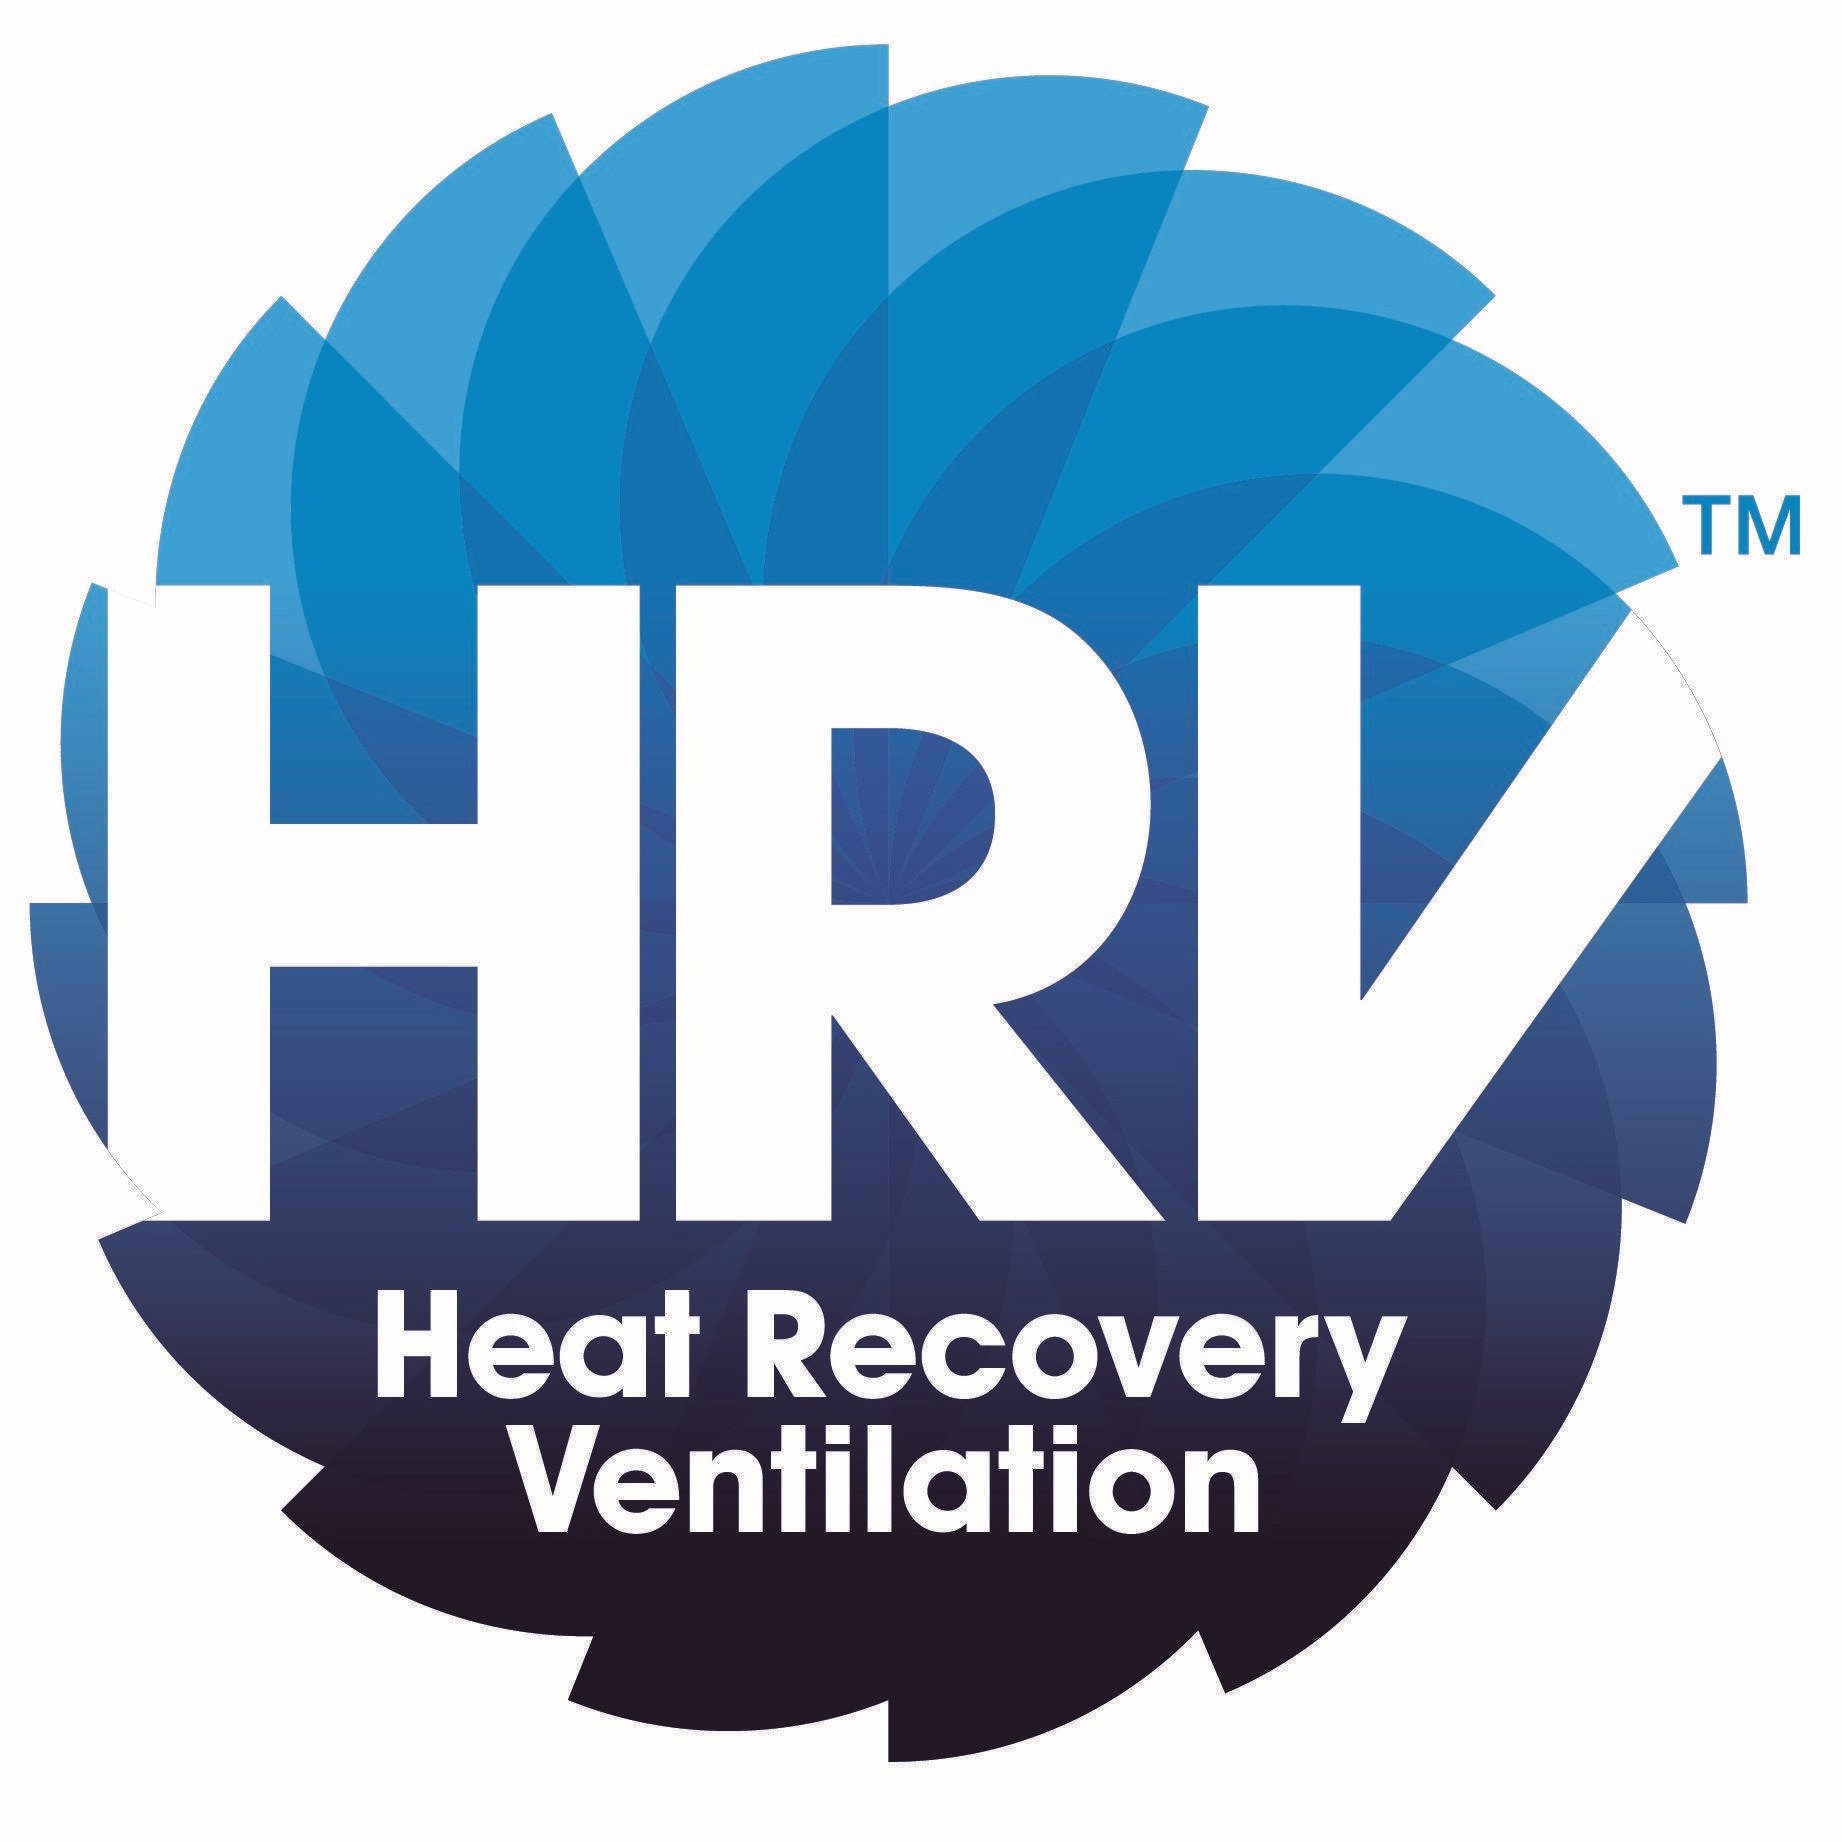 Hr-V Logo - Oct 18 News - New HRV Logo launched - HRV Group - Heat Recovery ...